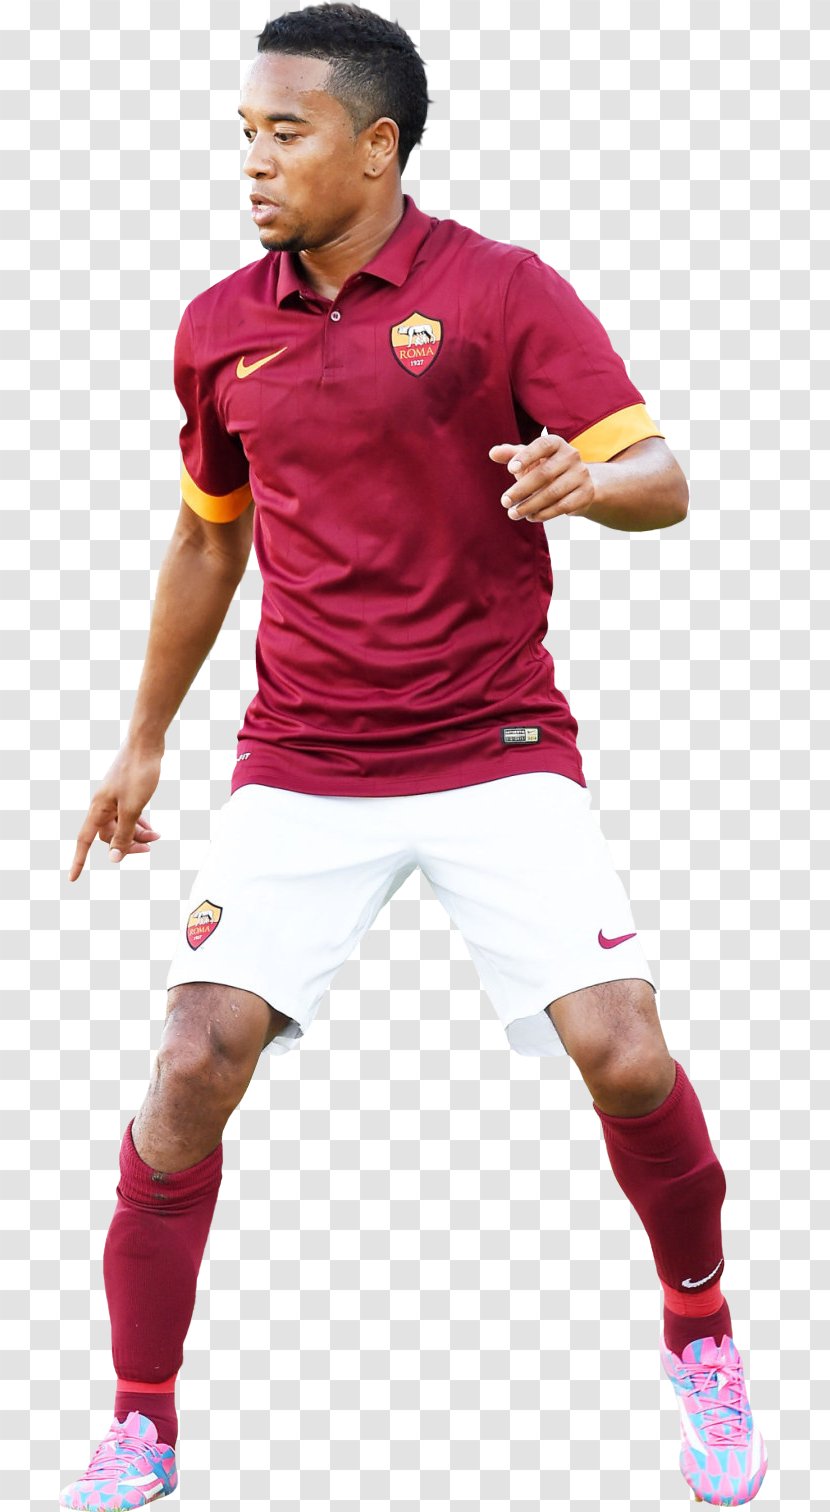 Urby Emanuelson A.S. Roma Football Player Sport - Computer Software Transparent PNG